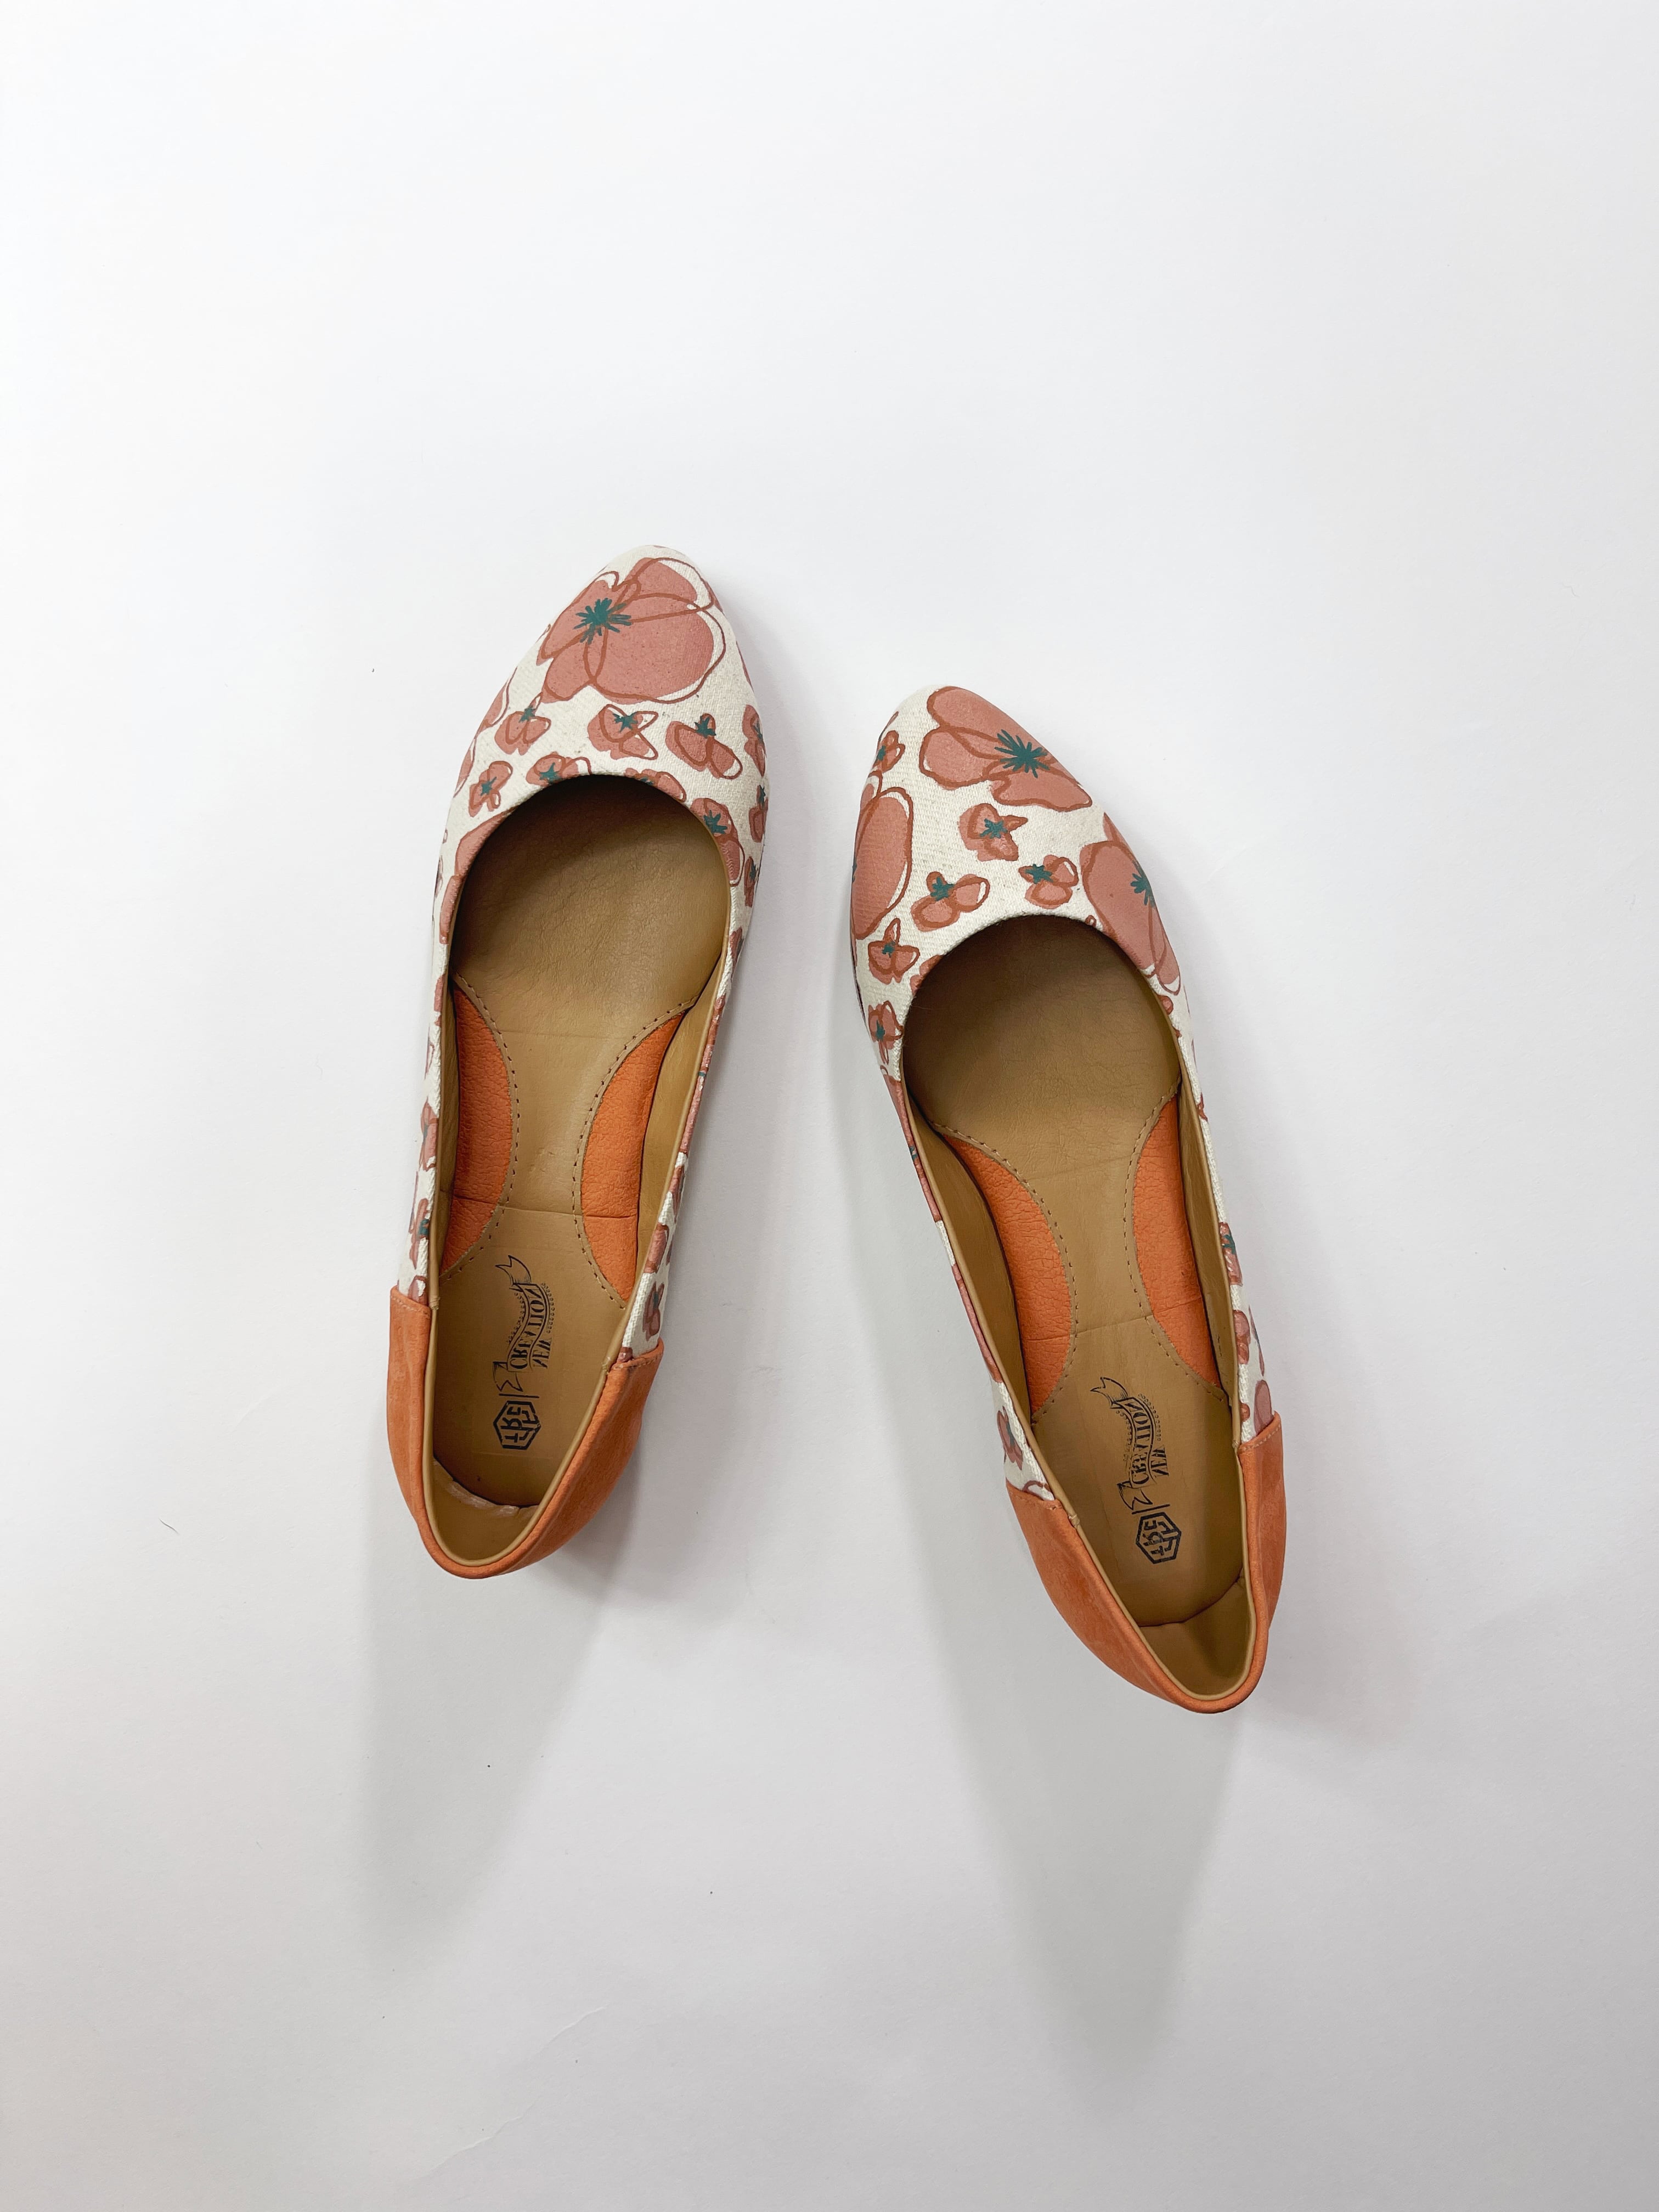 New Creation x TRC Thea Flat in Poppy (PREORDER)